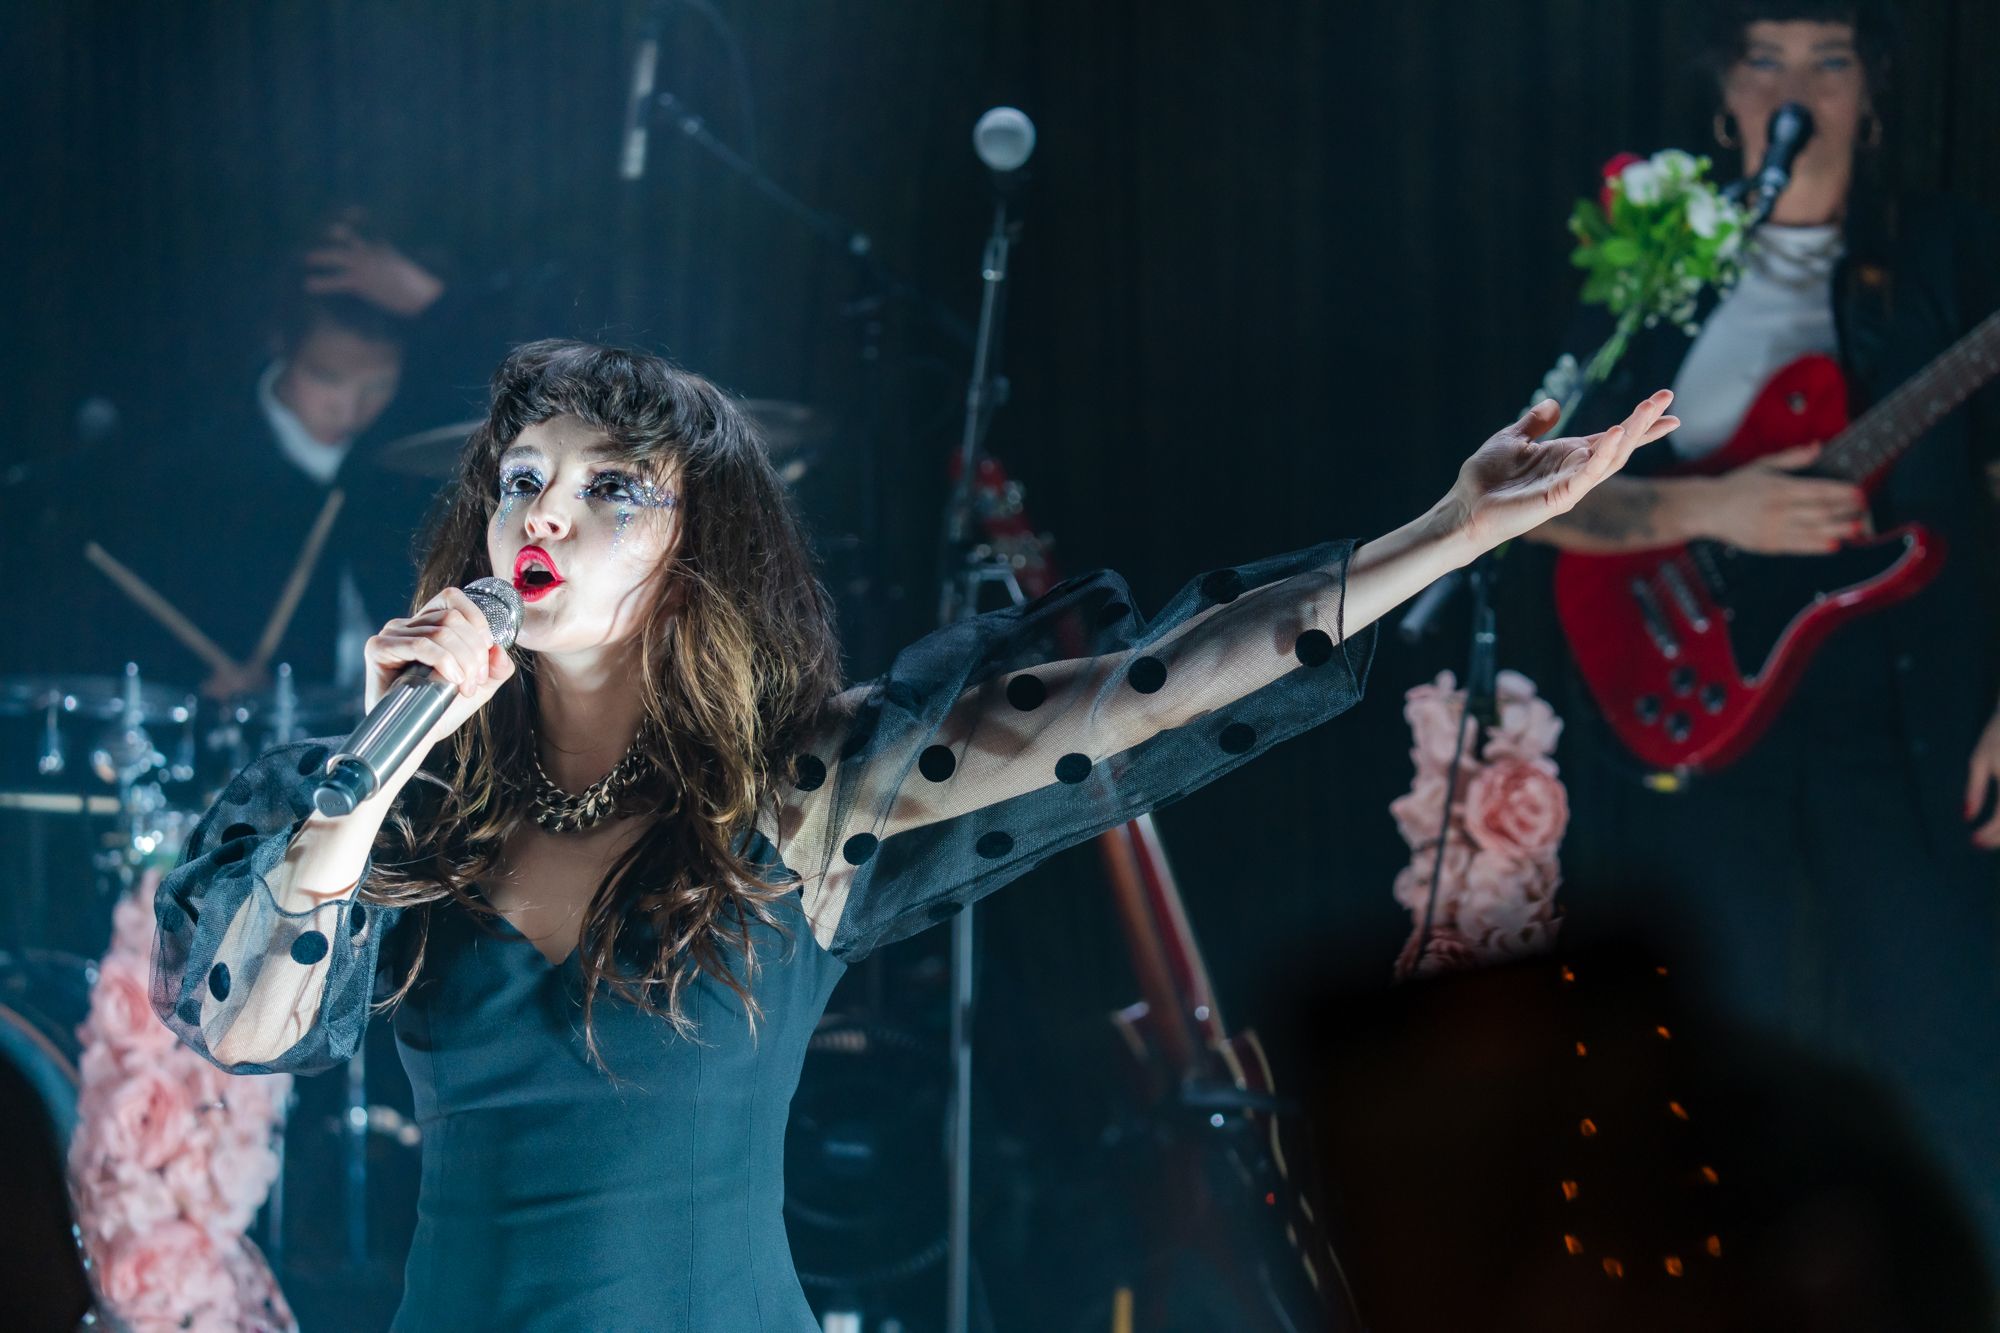 Lauren Mayberry Debuts New Sound Better Than You Can at Chicago's Lincoln Hall